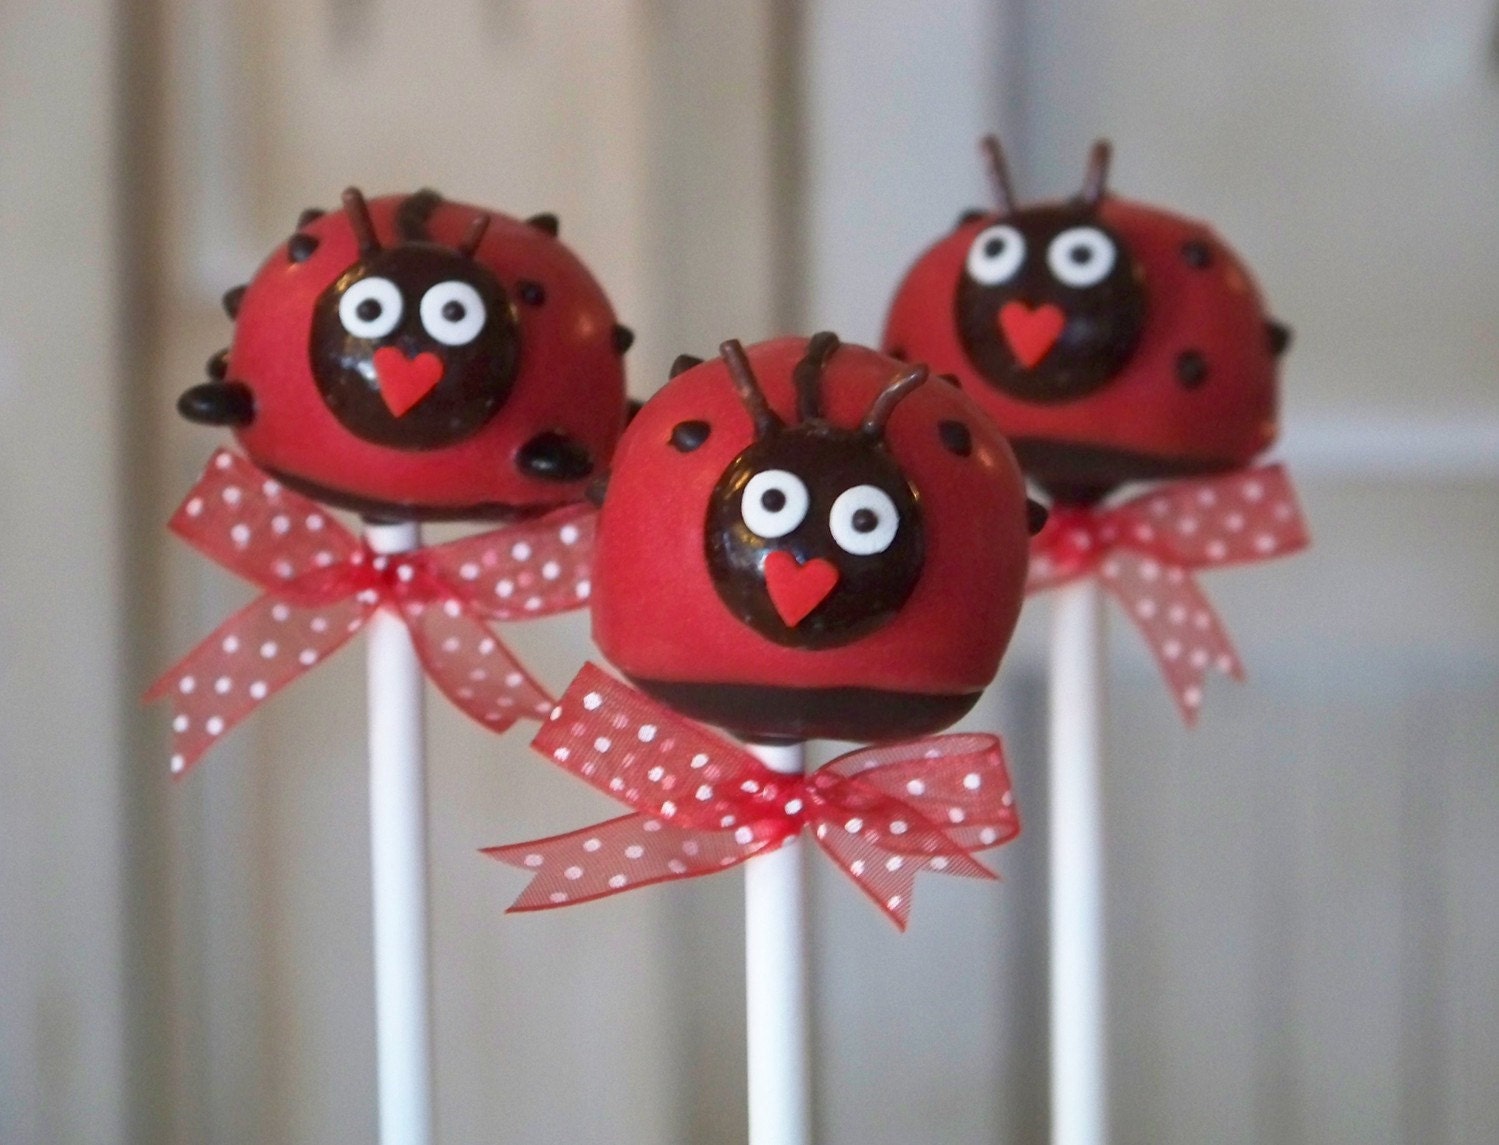 Mom's Killer Cakes & Cookies Ladybug Lady Bug Picnic Cake Pops Perfect For Easter